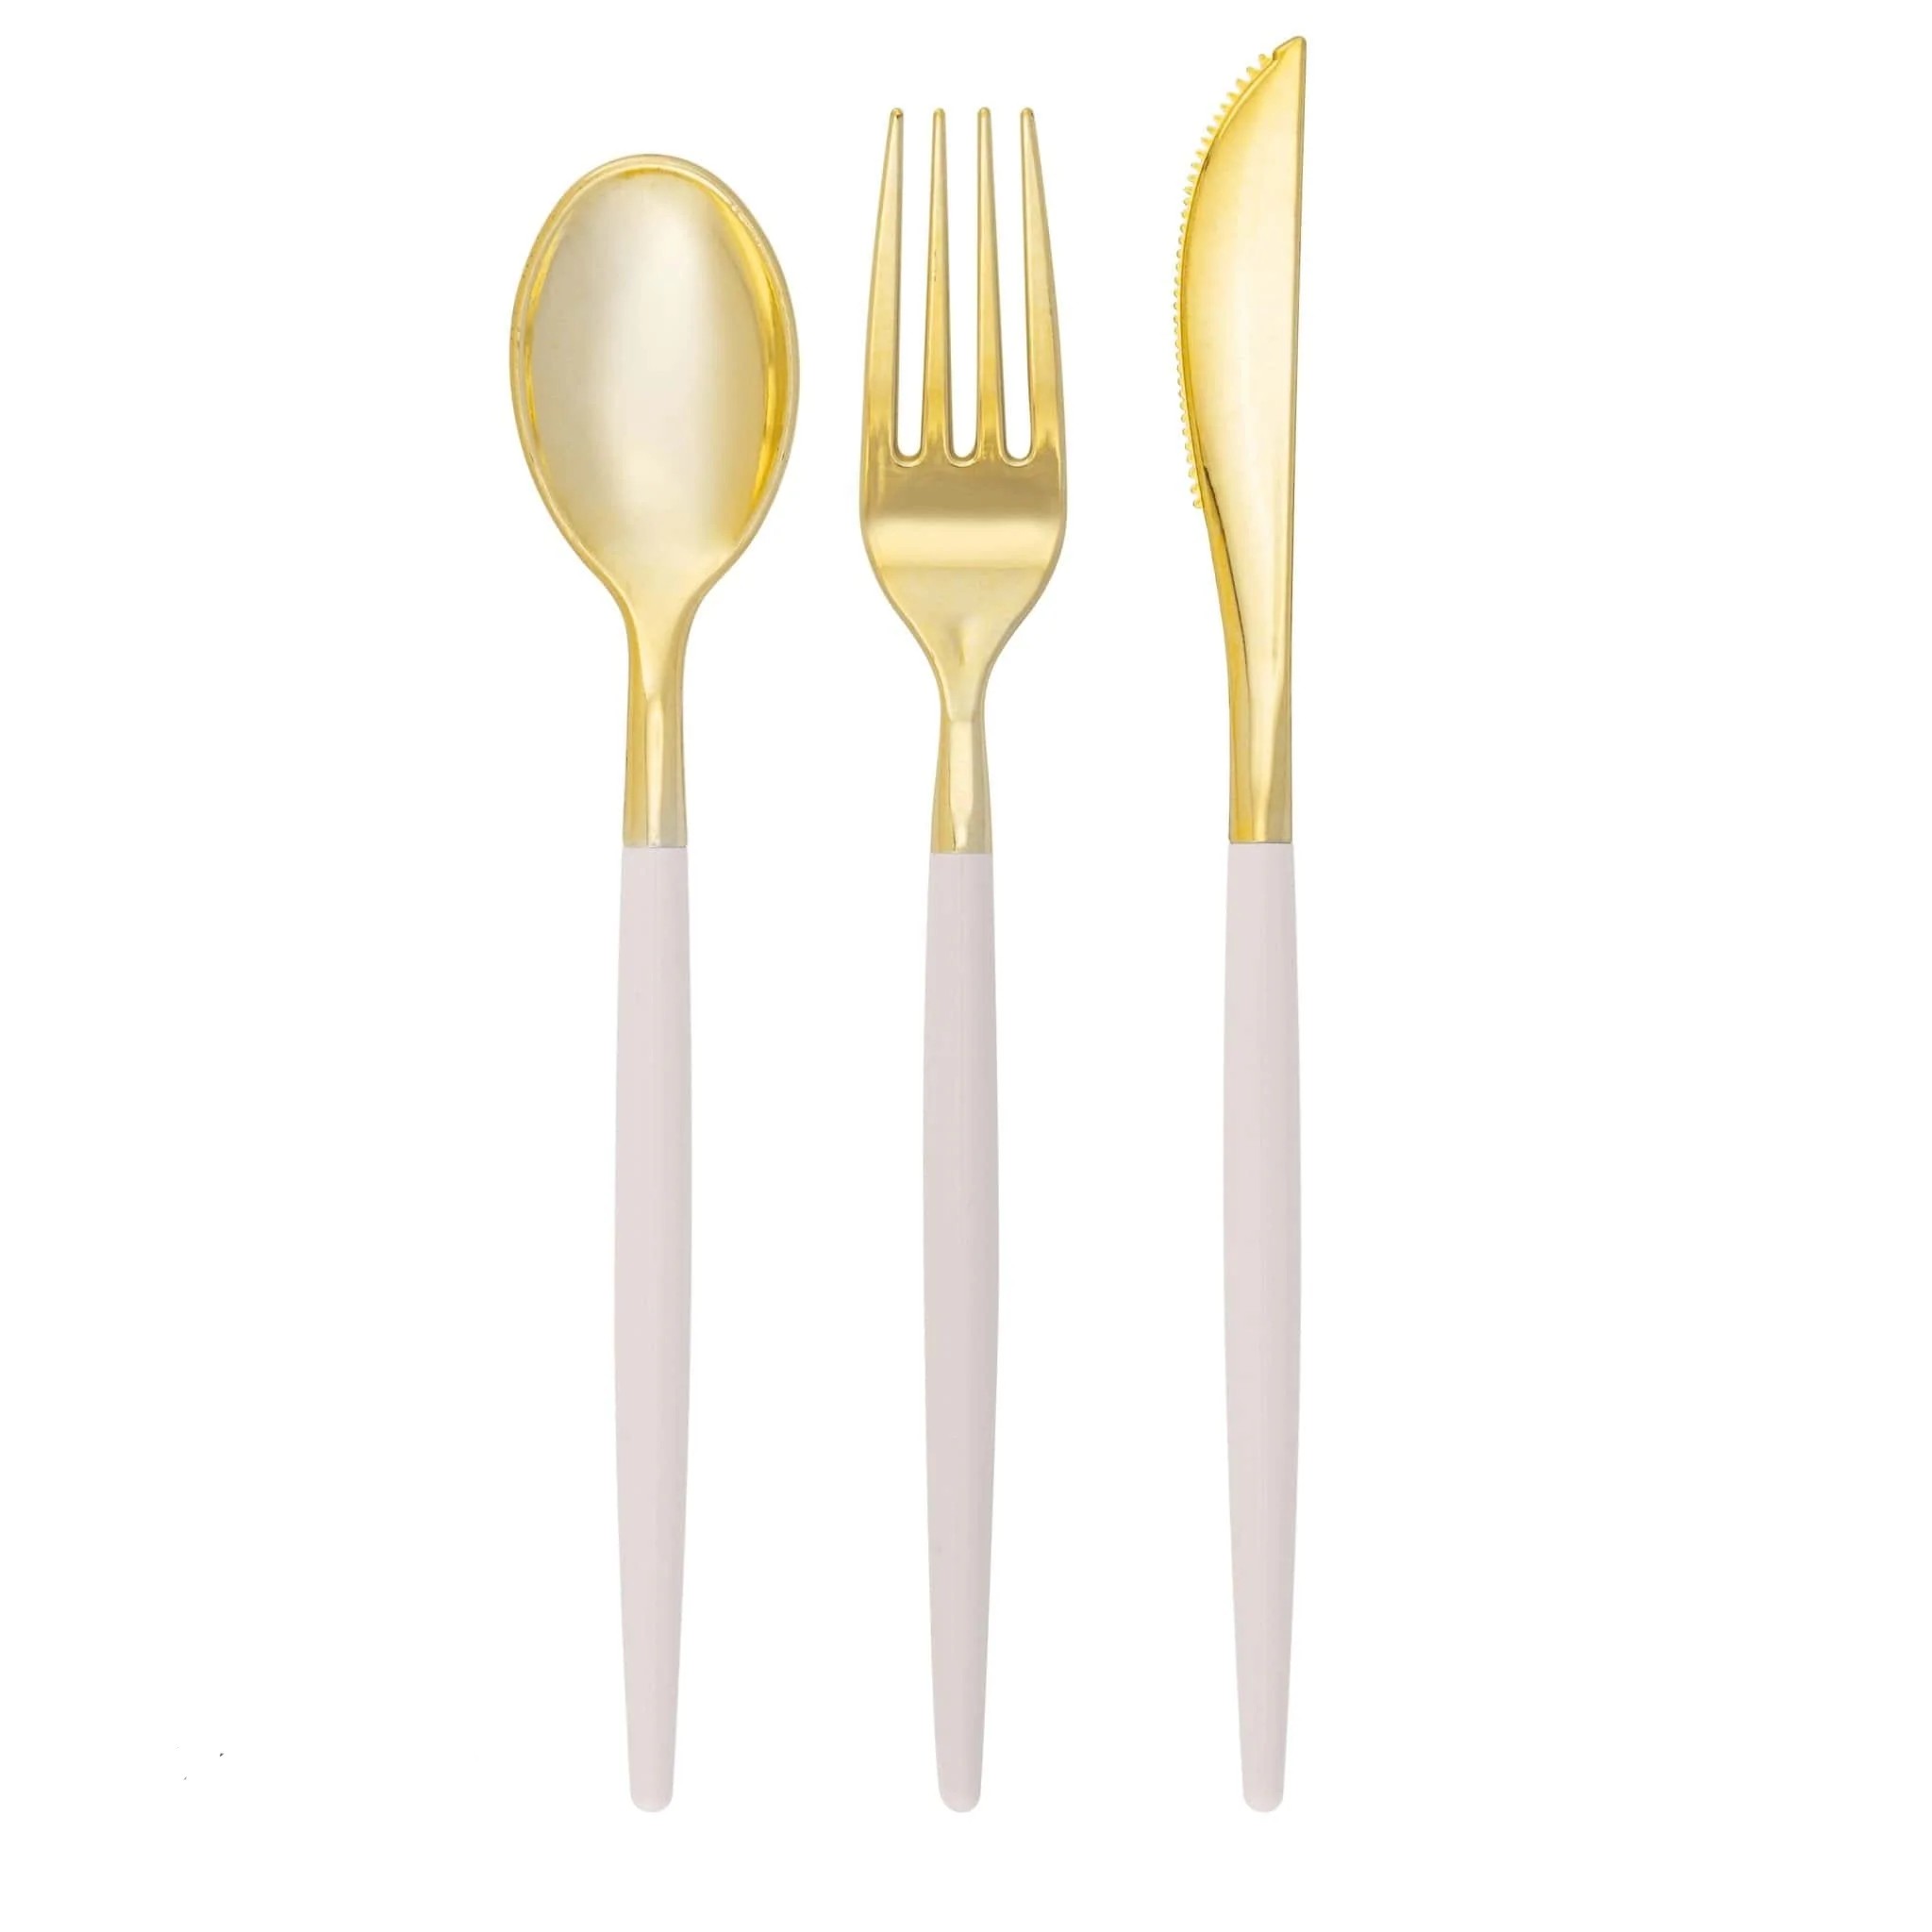 Luxe Party Linen and Gold Two Tone Plastic Cutlery Set - 32 pcs